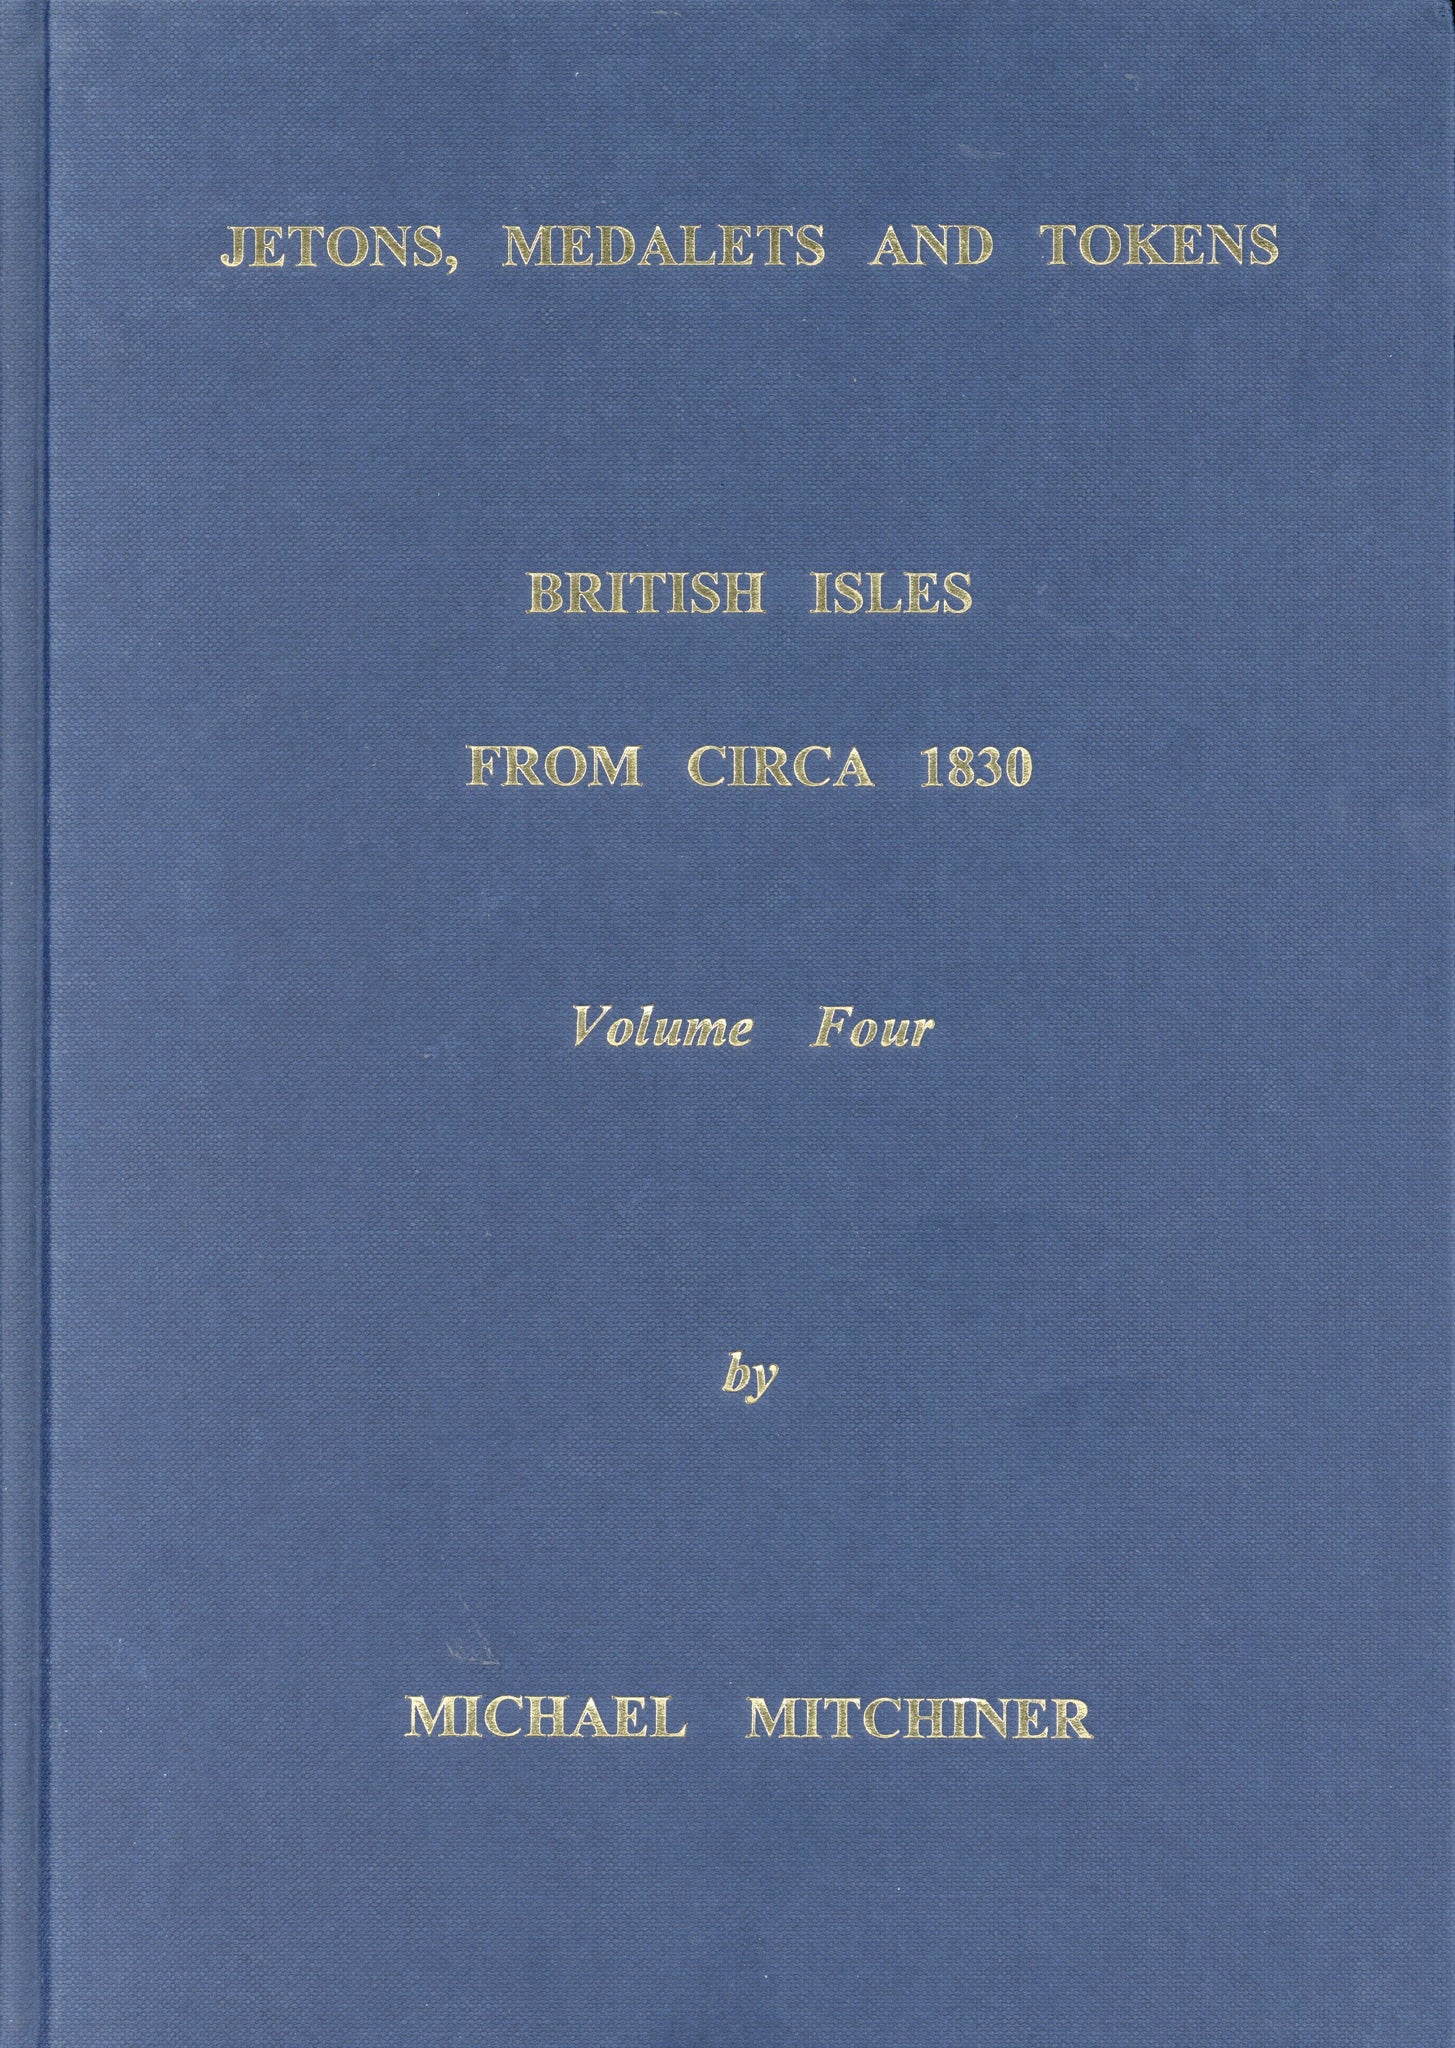 Jetons Medalets and Tokens Vol. 4 - The British Isles Circa 1830 by Mitchiner, M.